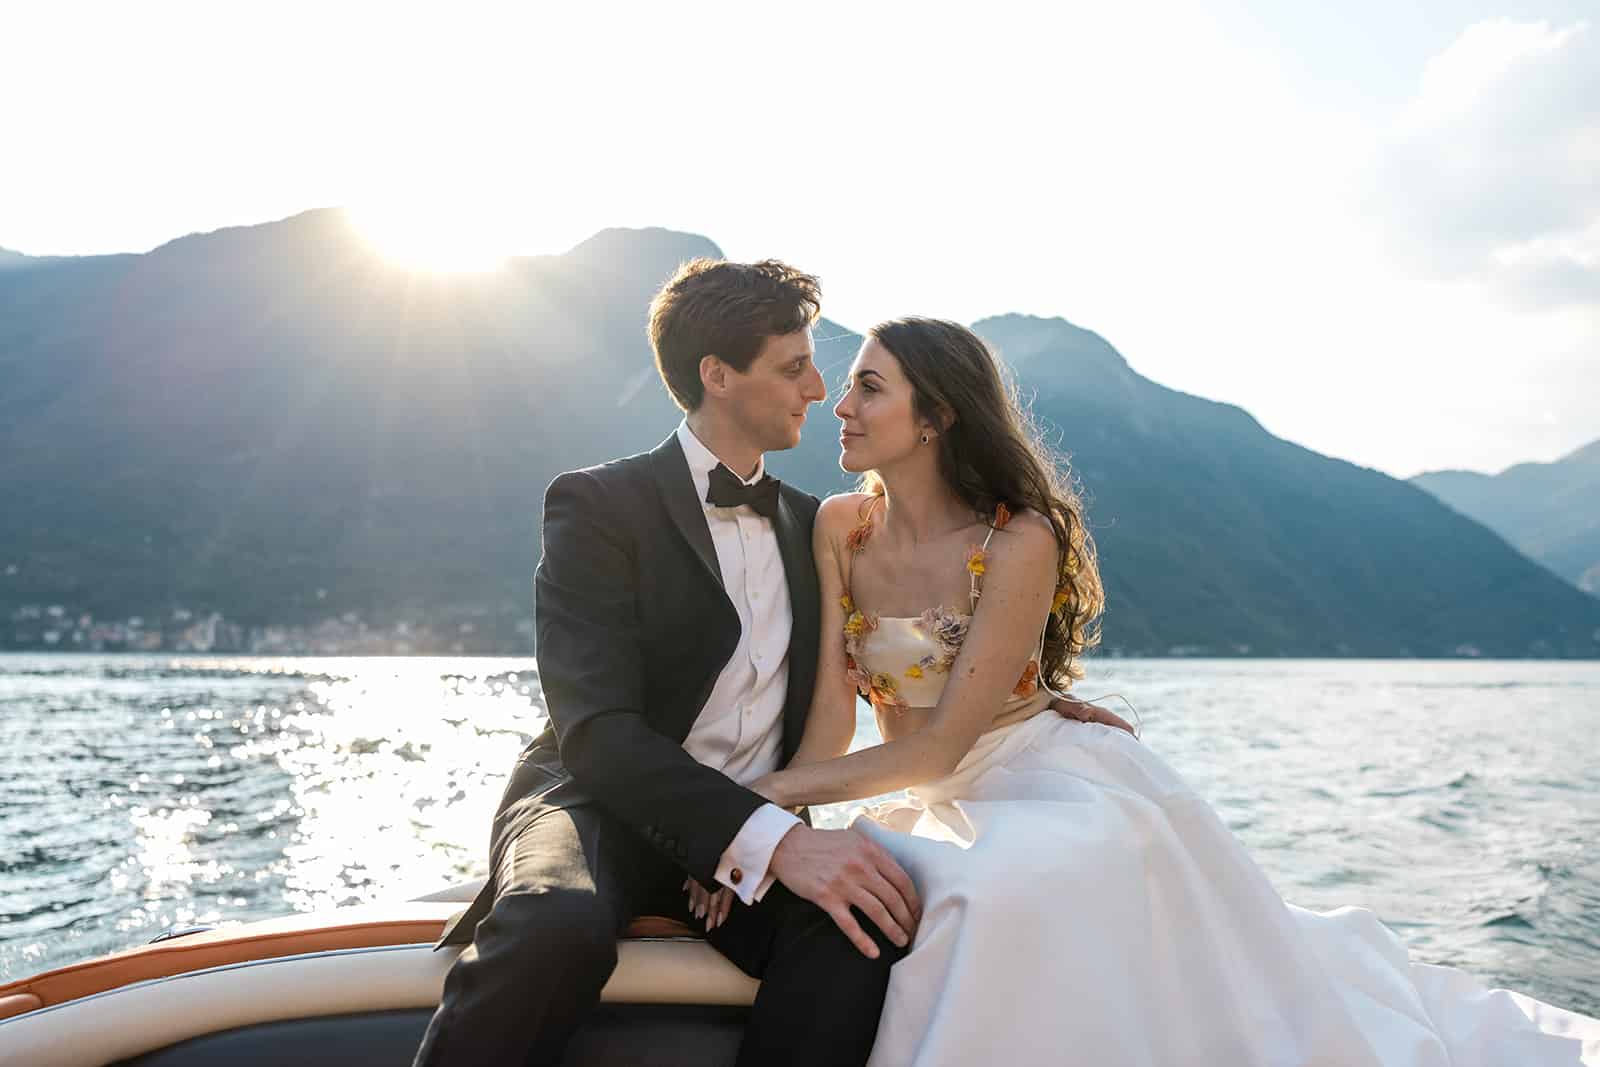 Bride and groom on a classic boat in Lake Como, Italy on their wedding day, captured by a destination photographer with the appropriate wedding photography equipment